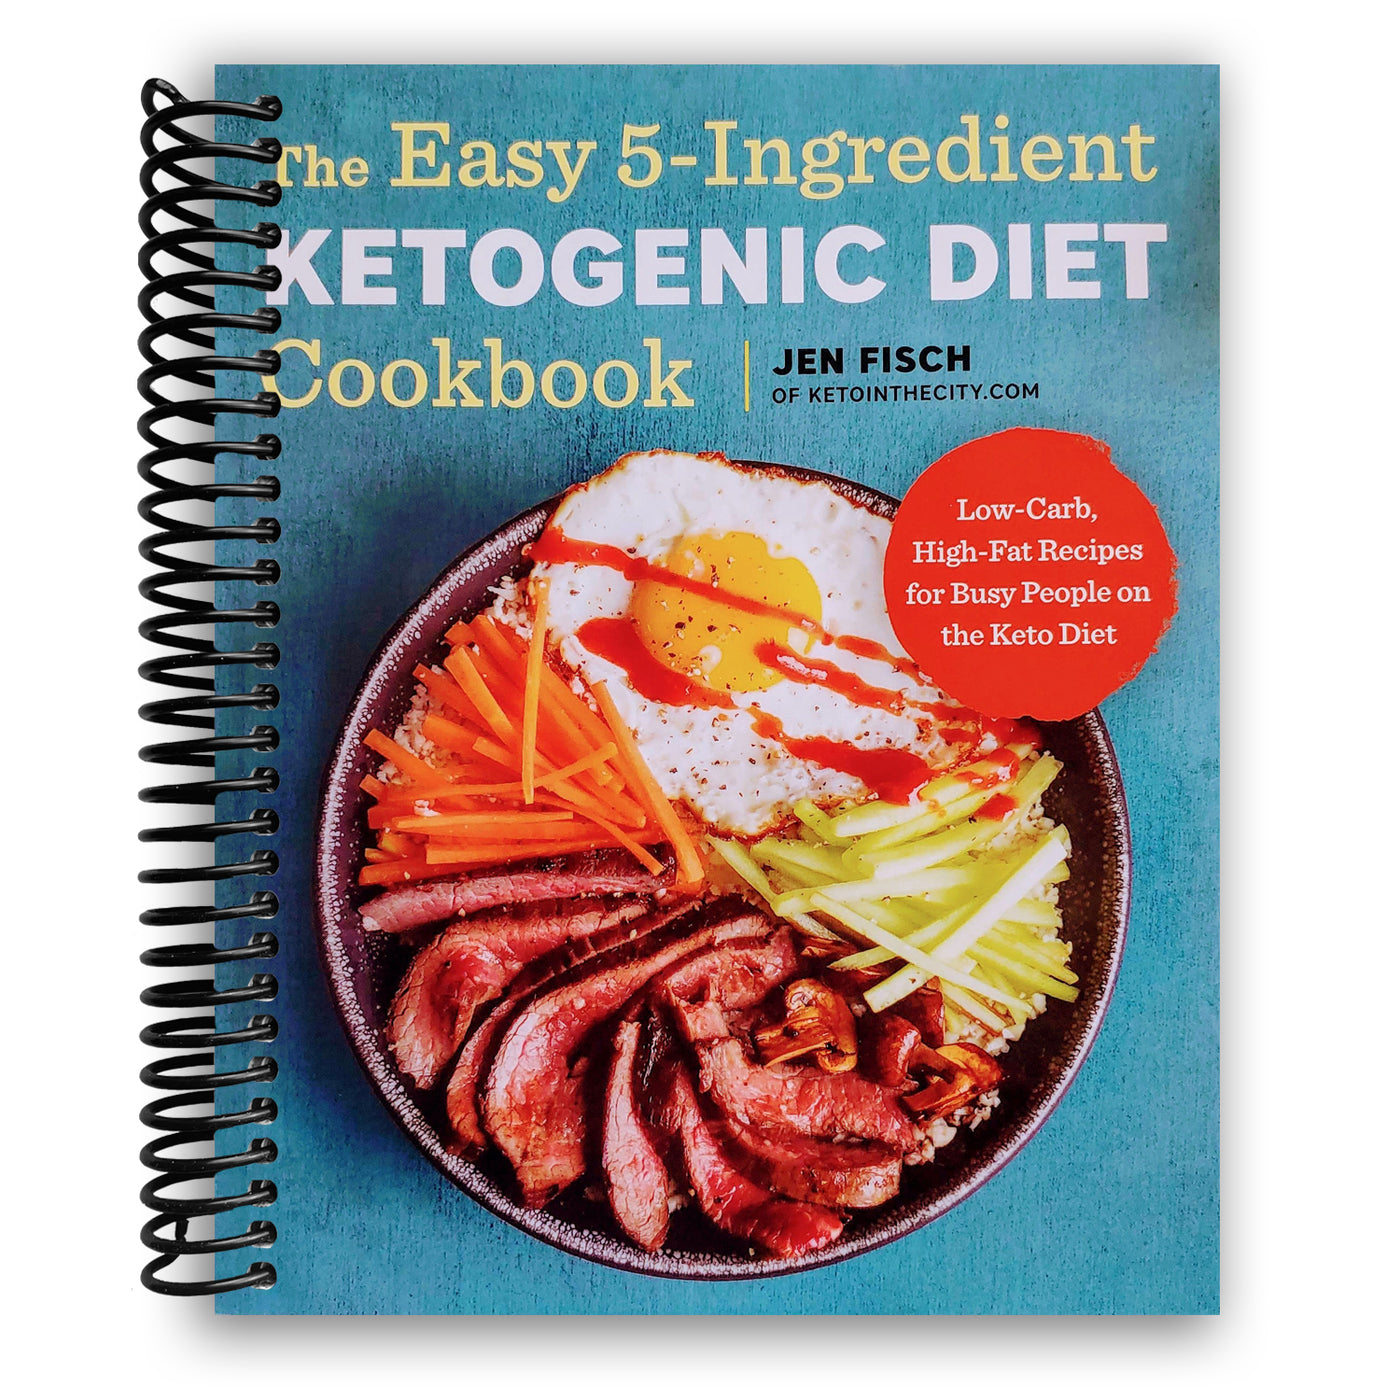 The Easy 5-Ingredient Ketogenic Diet Cookbook: Low-Carb, High-Fat Recipes for Busy People on the Keto Diet (Spiral Bound)